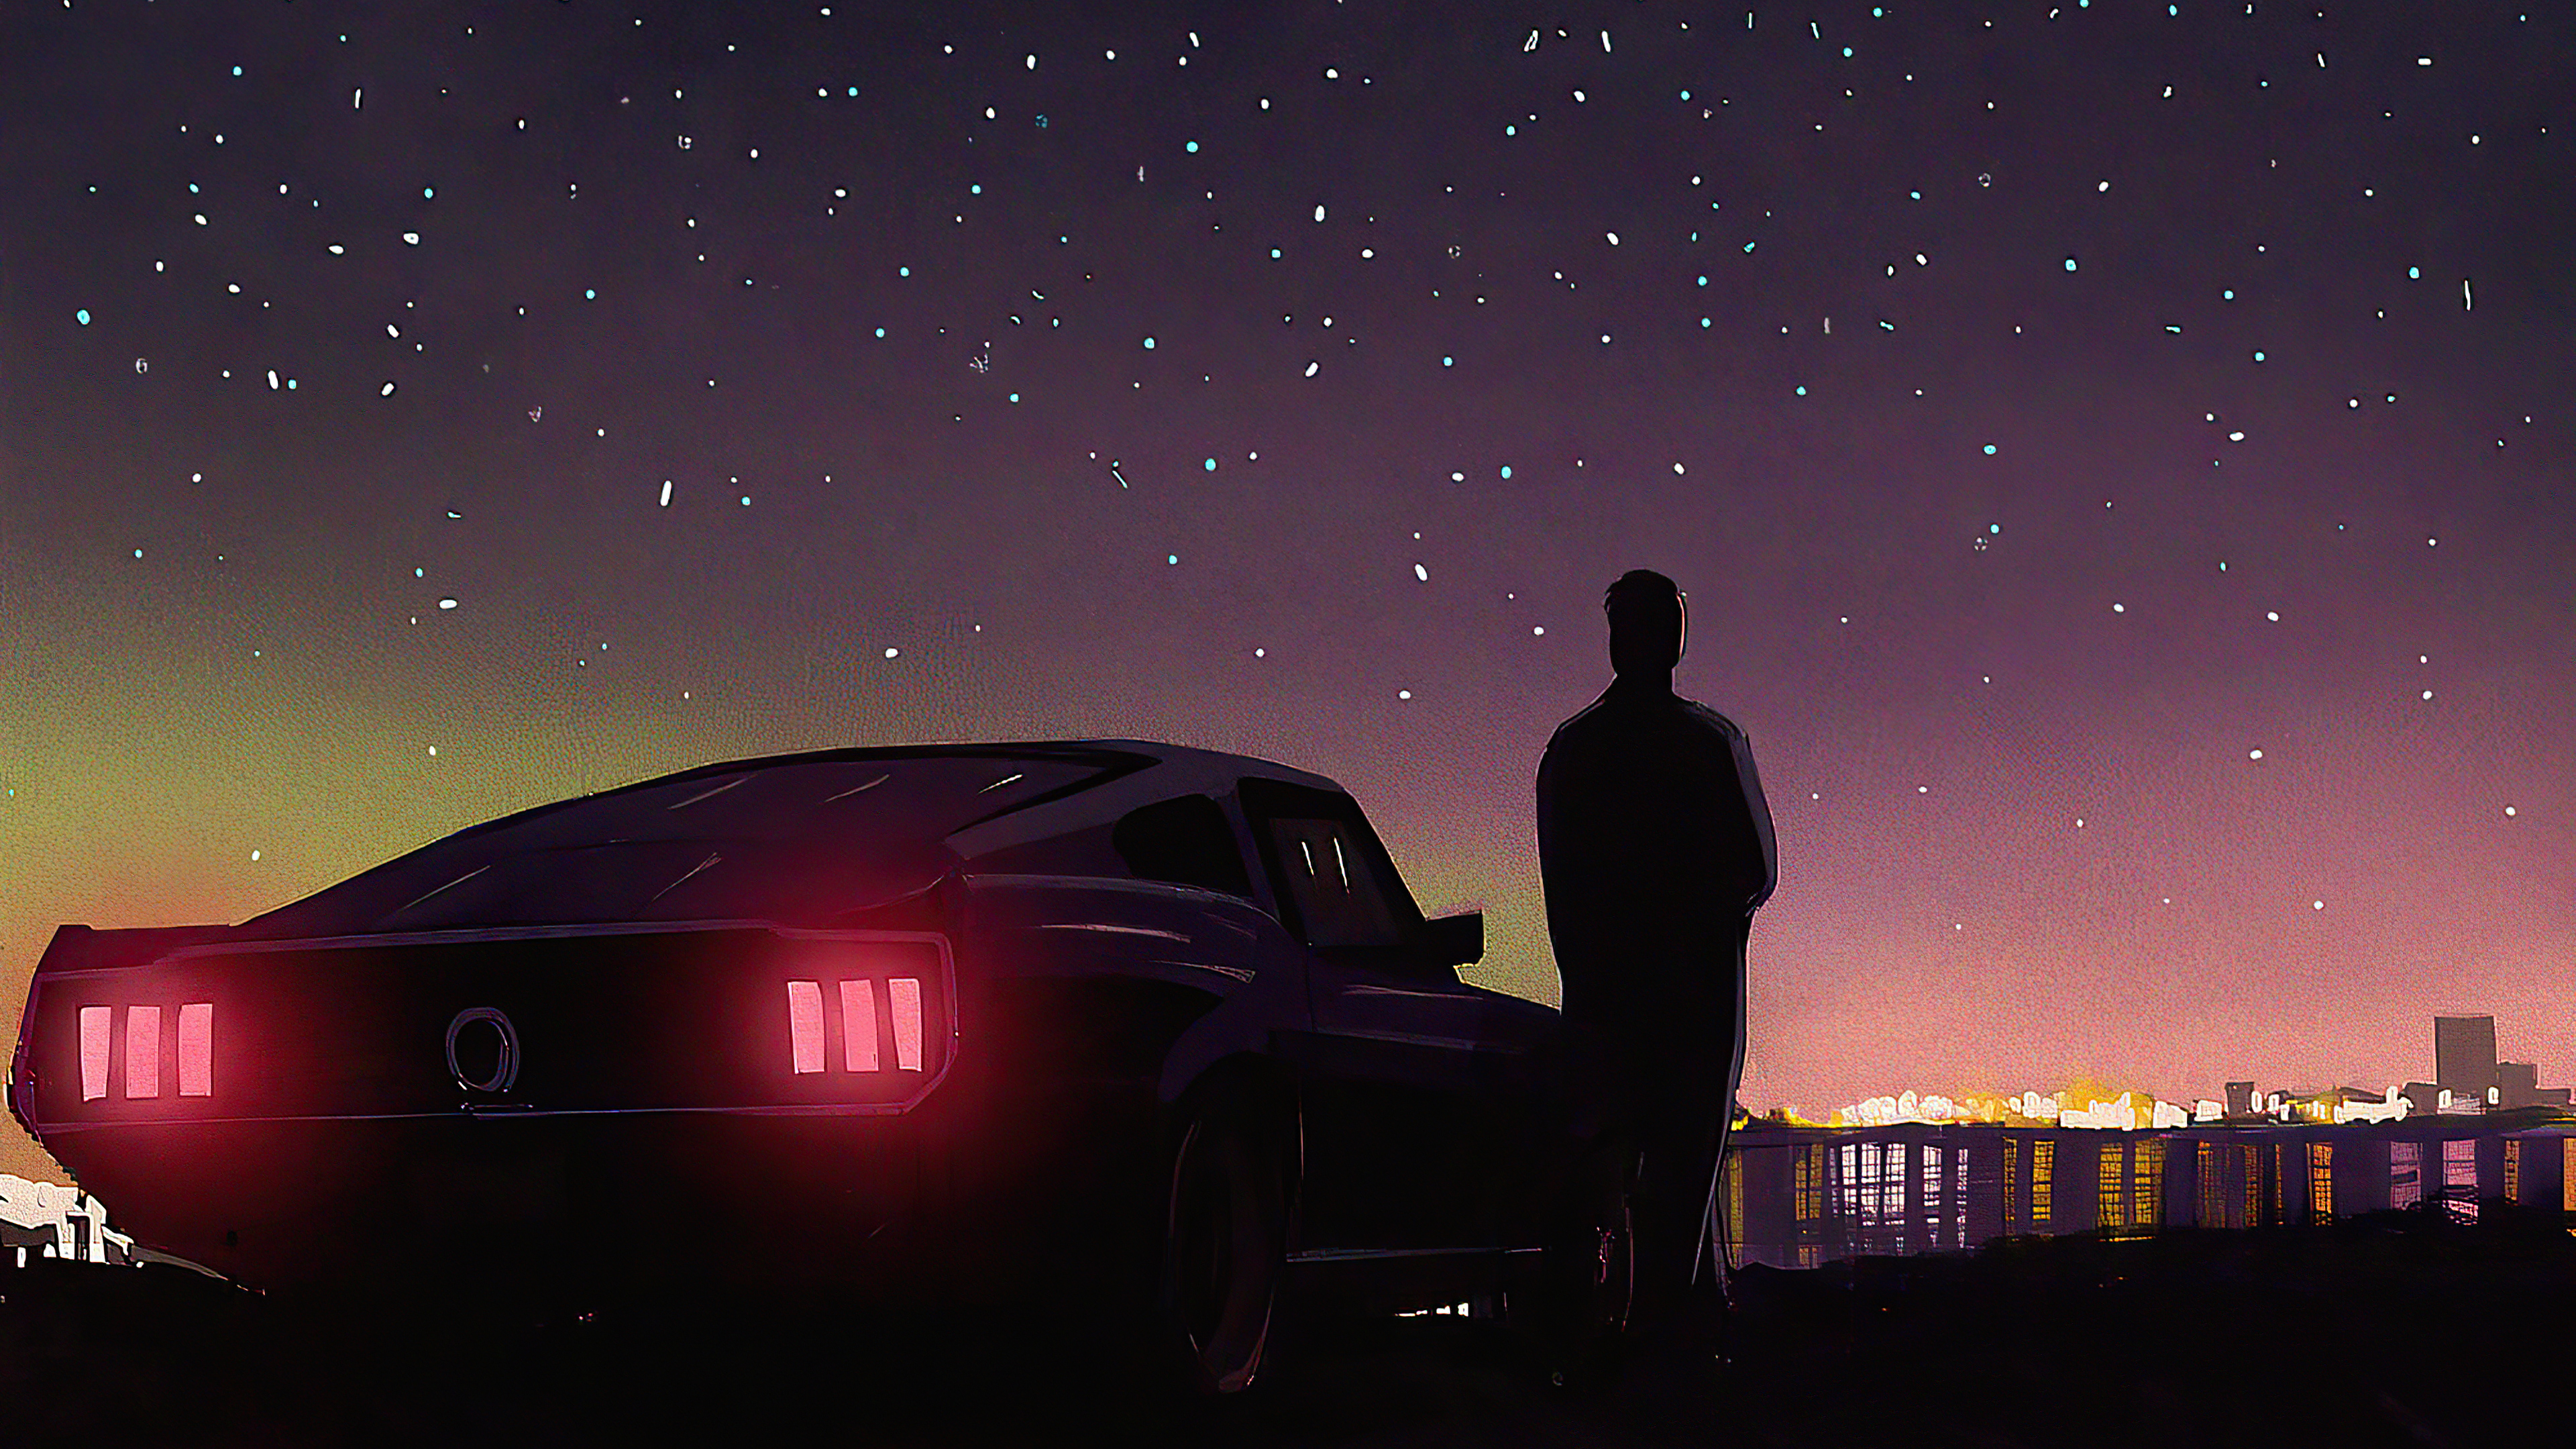 3840x2160 1920x1080 Retrowave Nights With Ford Mustang 4k Laptop Full HD 1080P HD 4k Wallpapers, Images, Backgrounds, Photos and Pictures